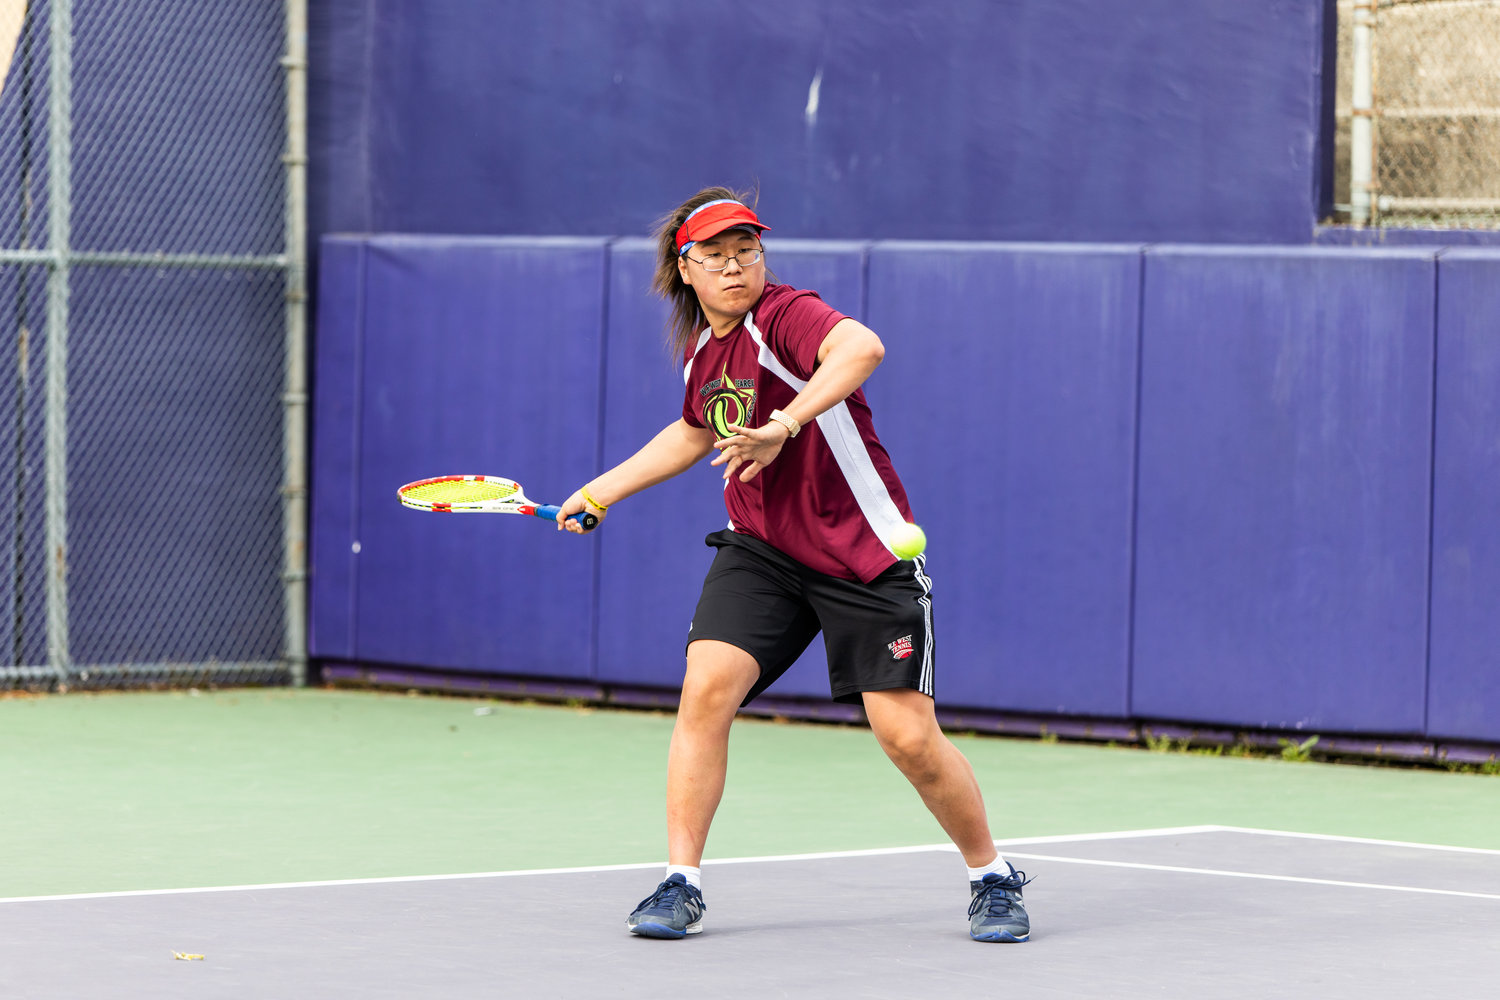 W.F. West's Justin Chung eyes the ball during the first set of the 2A boys' singles tennis state competition on May 27, 2022.